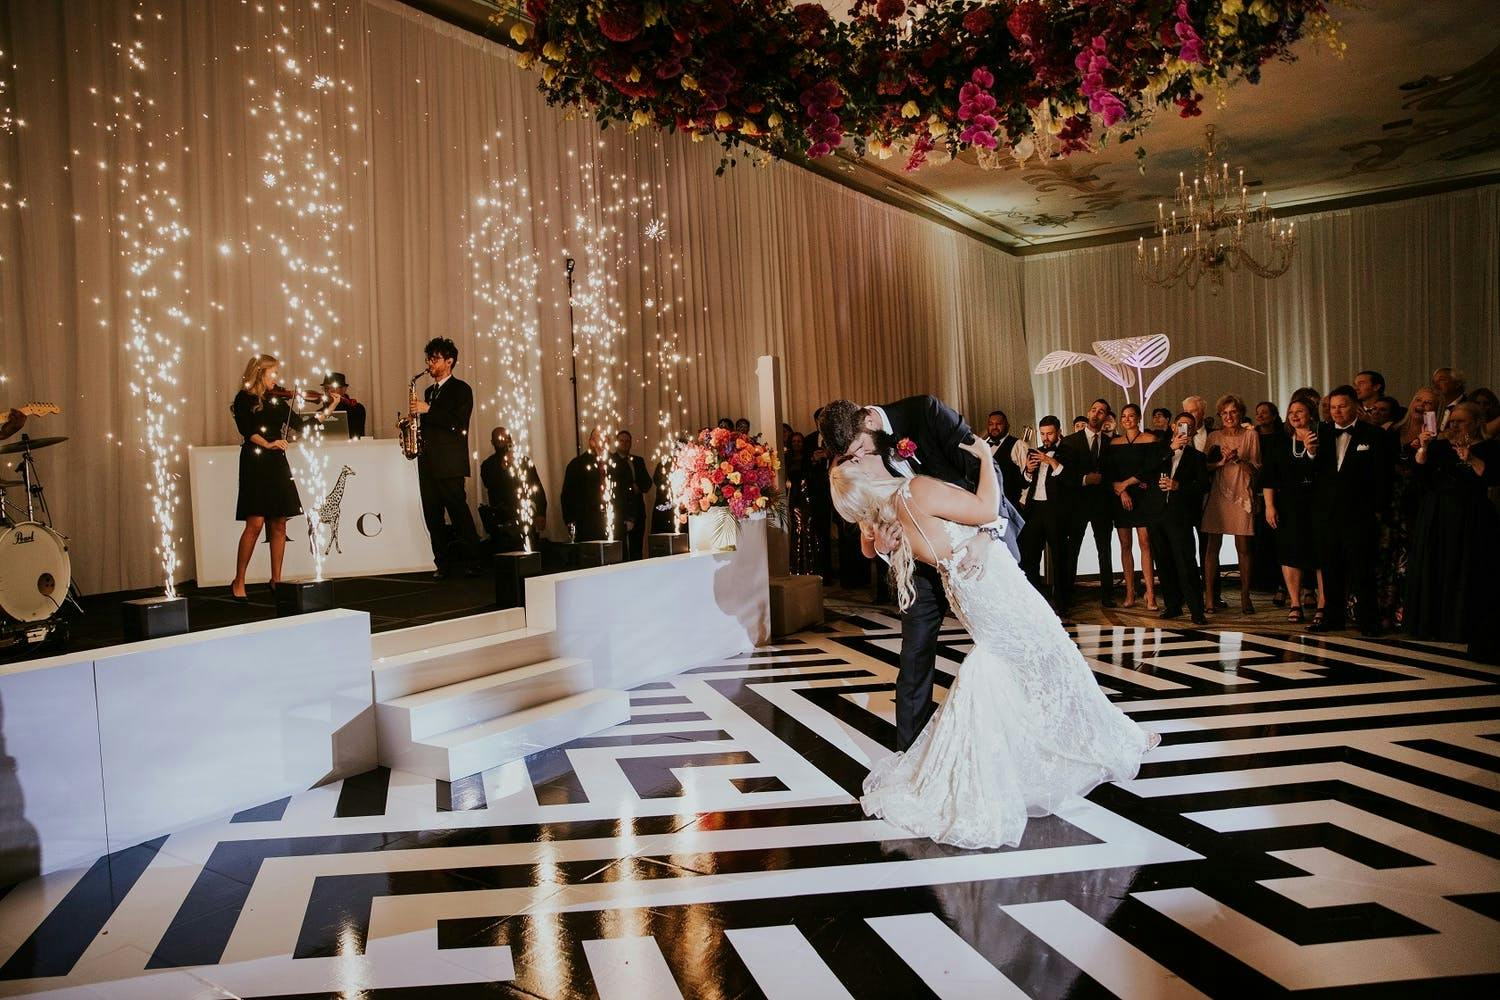 Black and White Art Deco Dance Floor With Cold Fireworks and Colorful Wreath Ceiling Installation | PartySlate